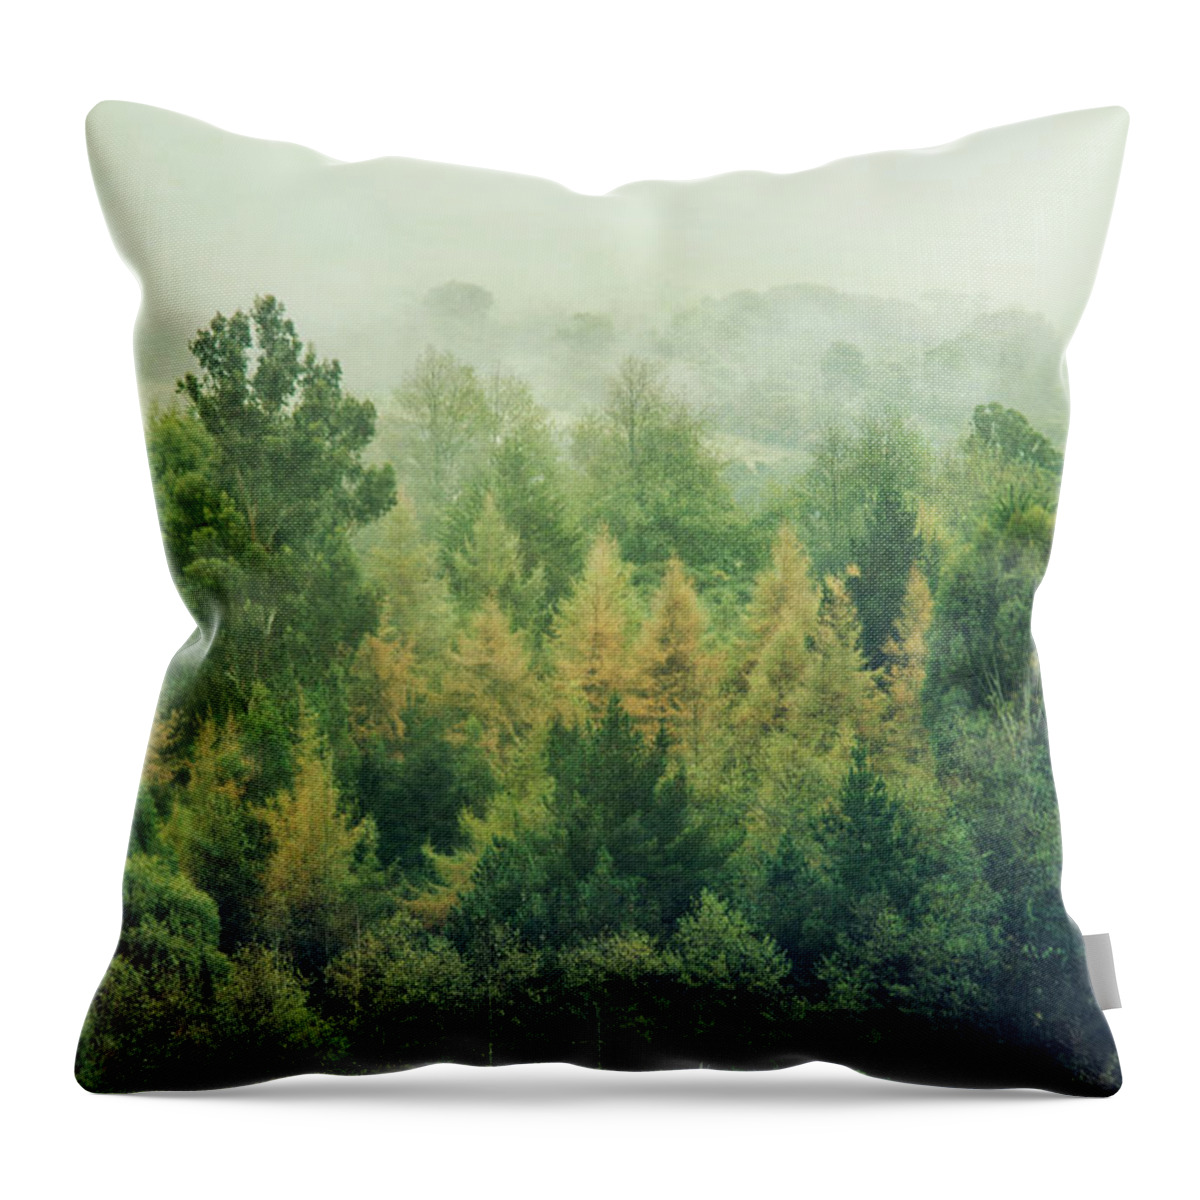 Scenics Throw Pillow featuring the photograph Trees In Mist by Jill Ferry